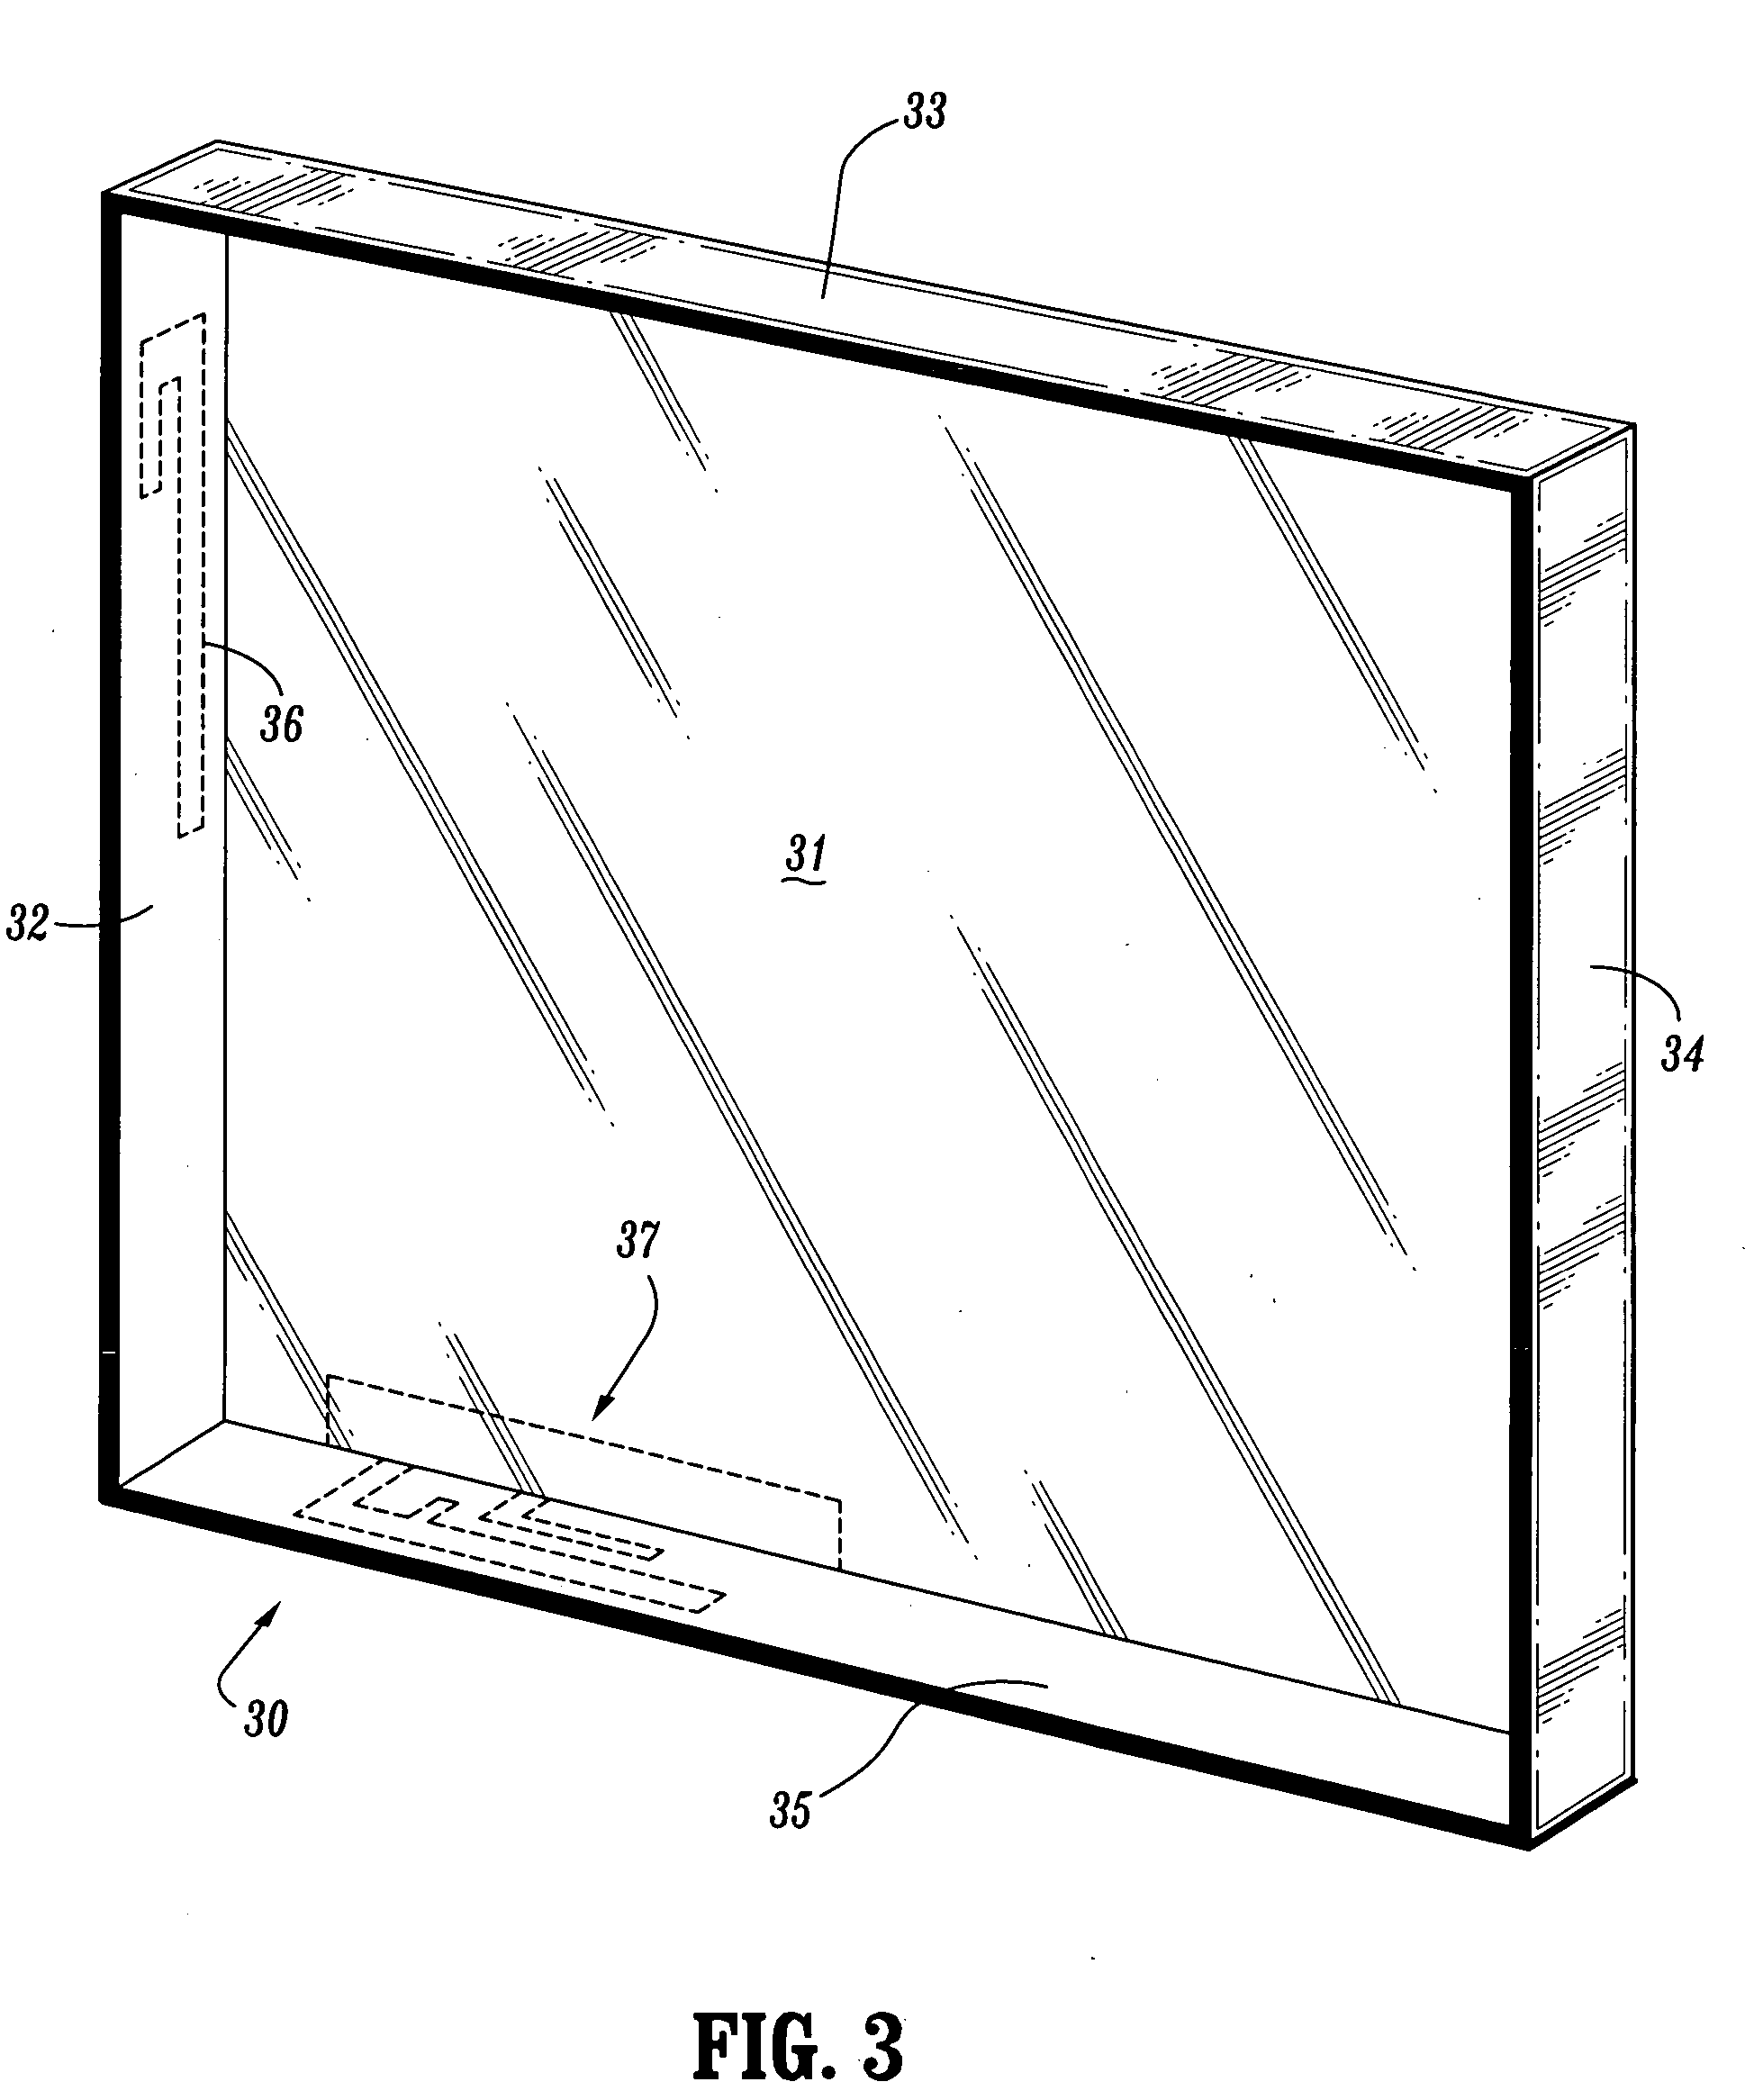 Antennas encapsulated within plastic display covers of computing devices